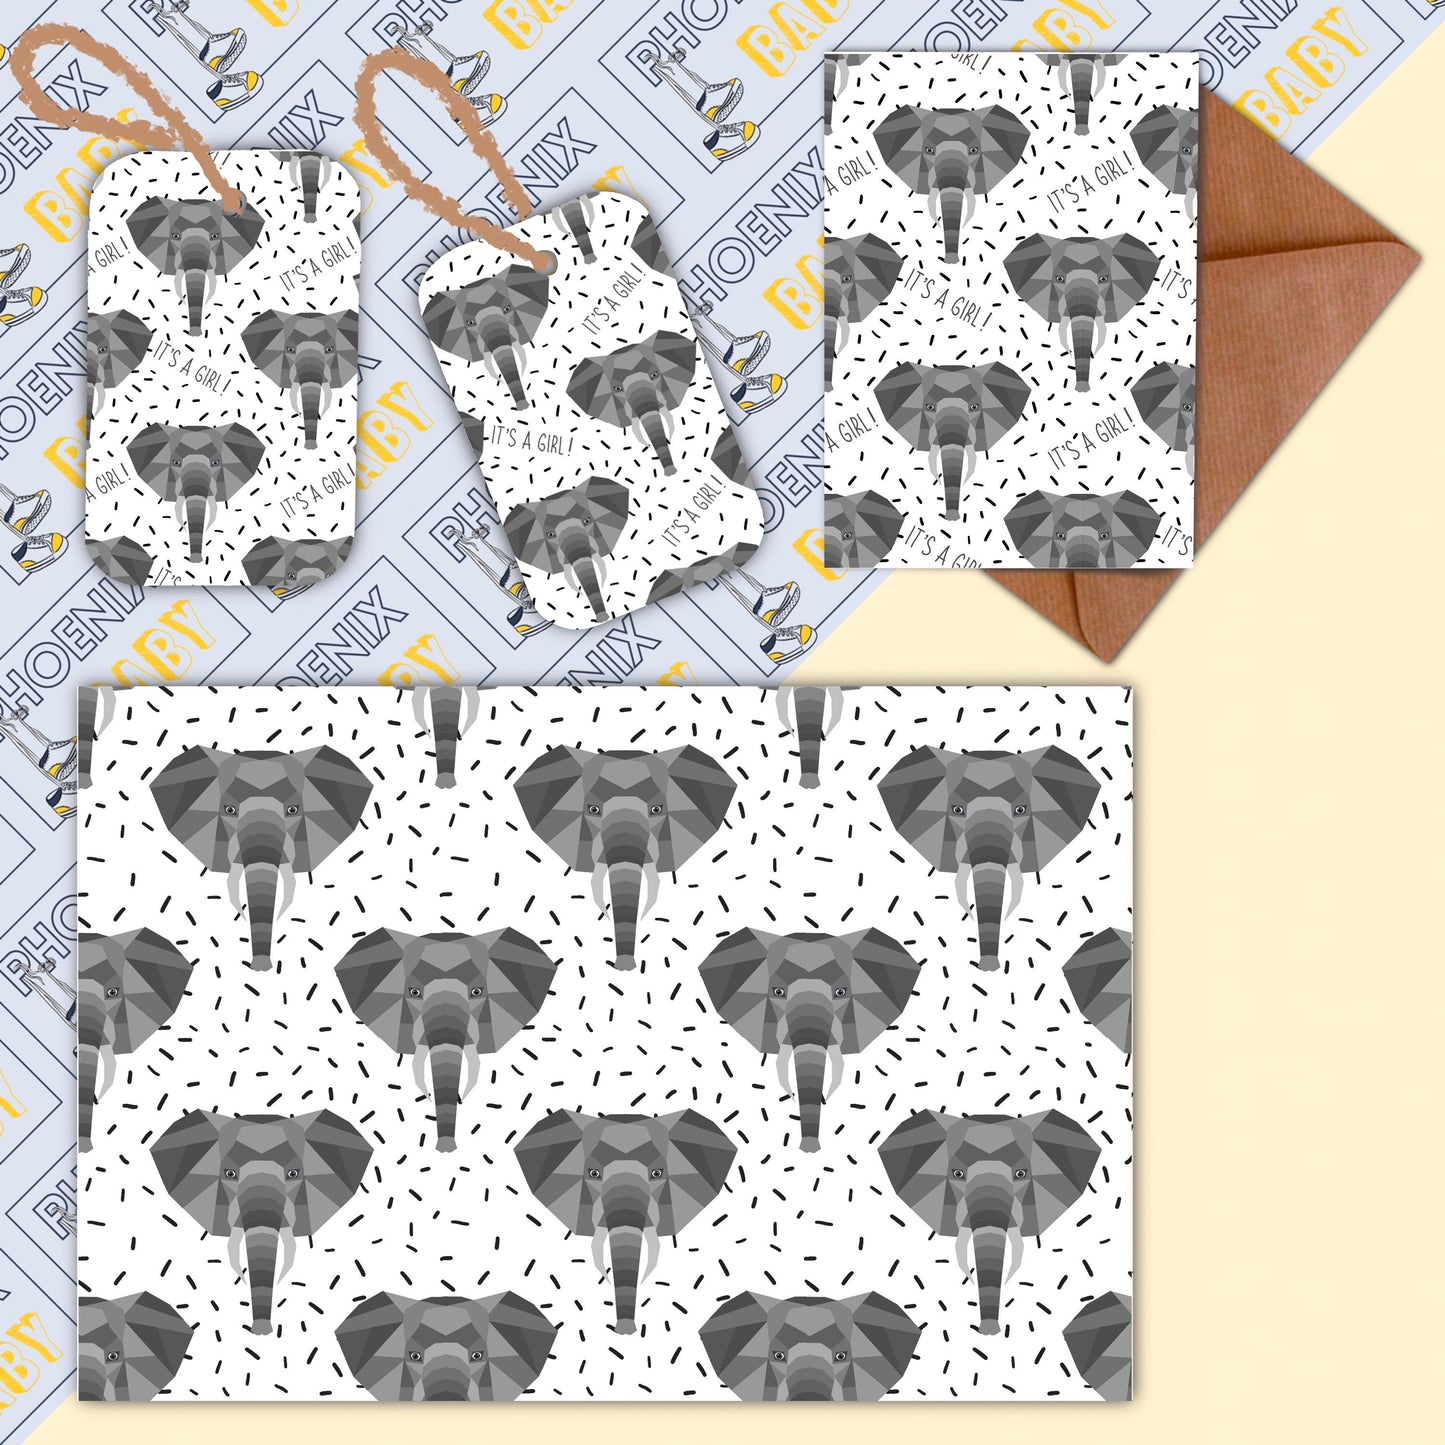 Elephant Wrapping Paper // It's a girl gift wrap, elephant gift wrap, Elephant gift tags, Elephant card, Elephant wrapping set, gift ideas